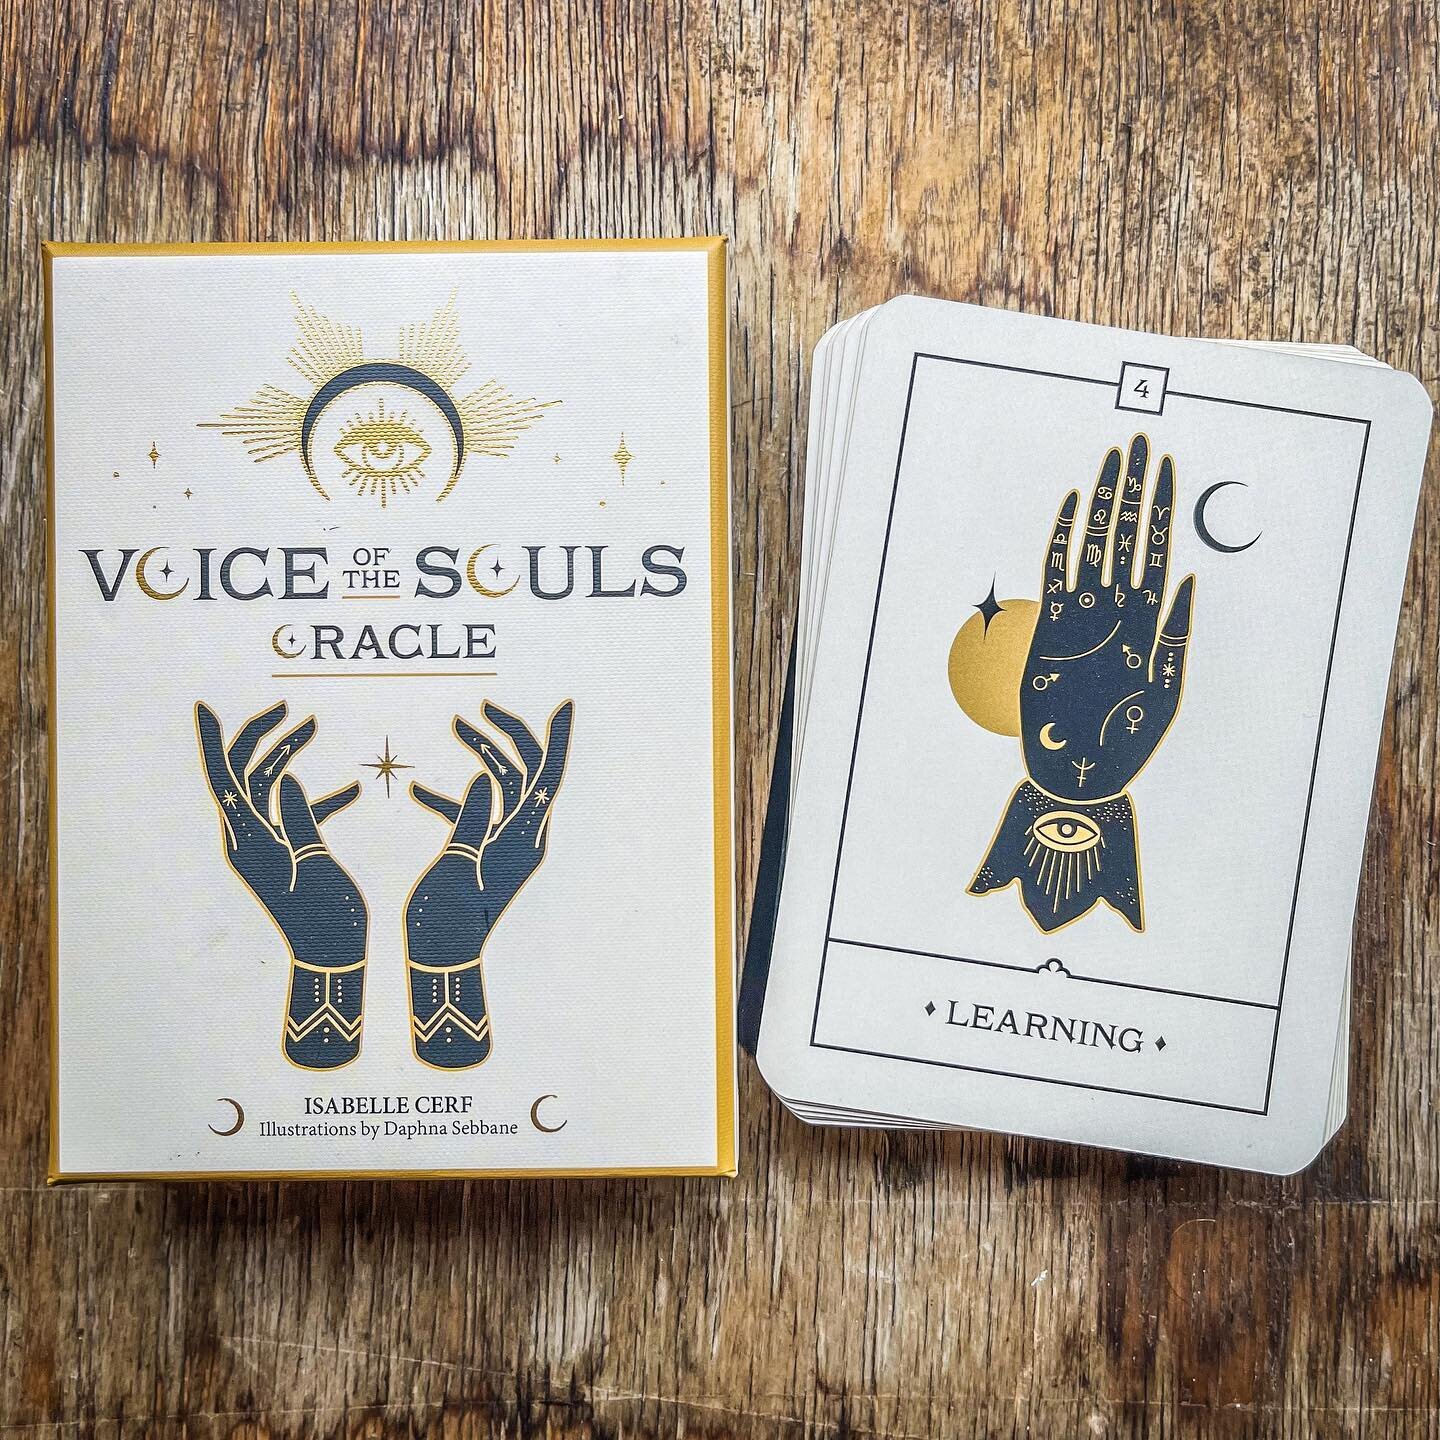 Voice of the souls oracle cards now in stock. &pound;18.99
#oracle #oraclecards #fortuneteller #witchaesthetic #tarot #tarotreading #icenine #independent #independantbusiness #nottingham